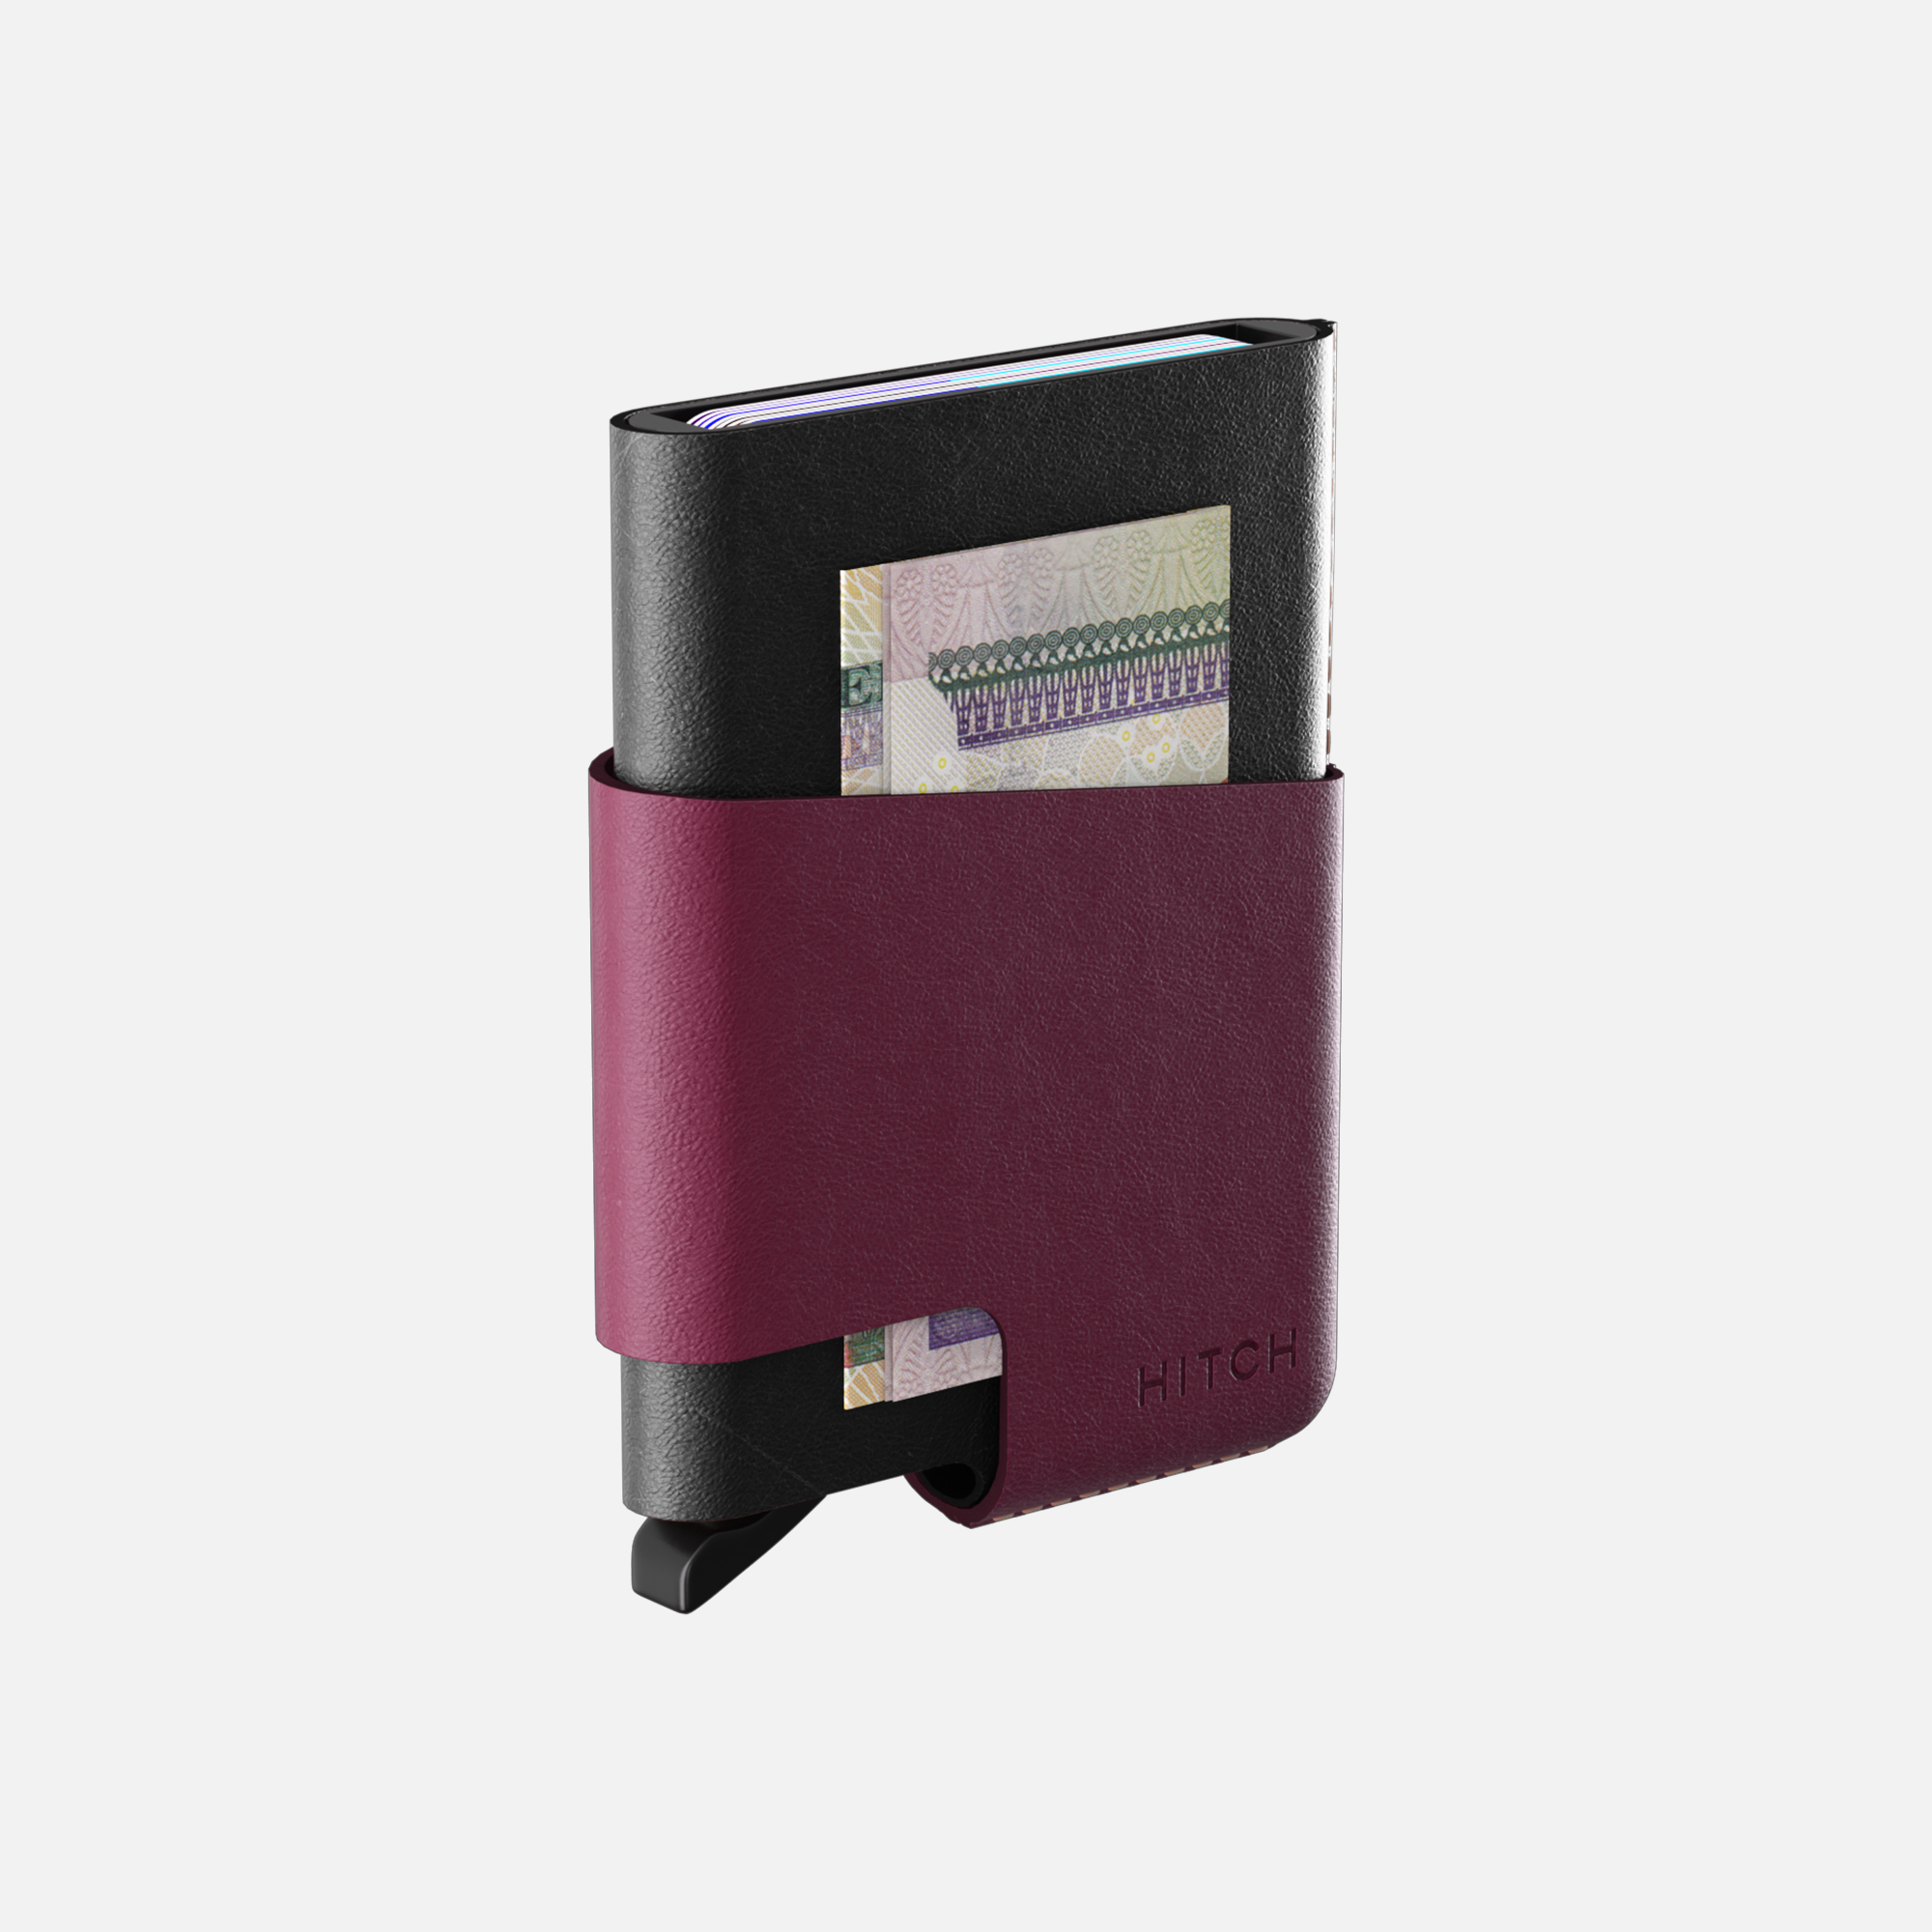 Minimalist black and burgundy leather wallet with money clip and card storage on white background."